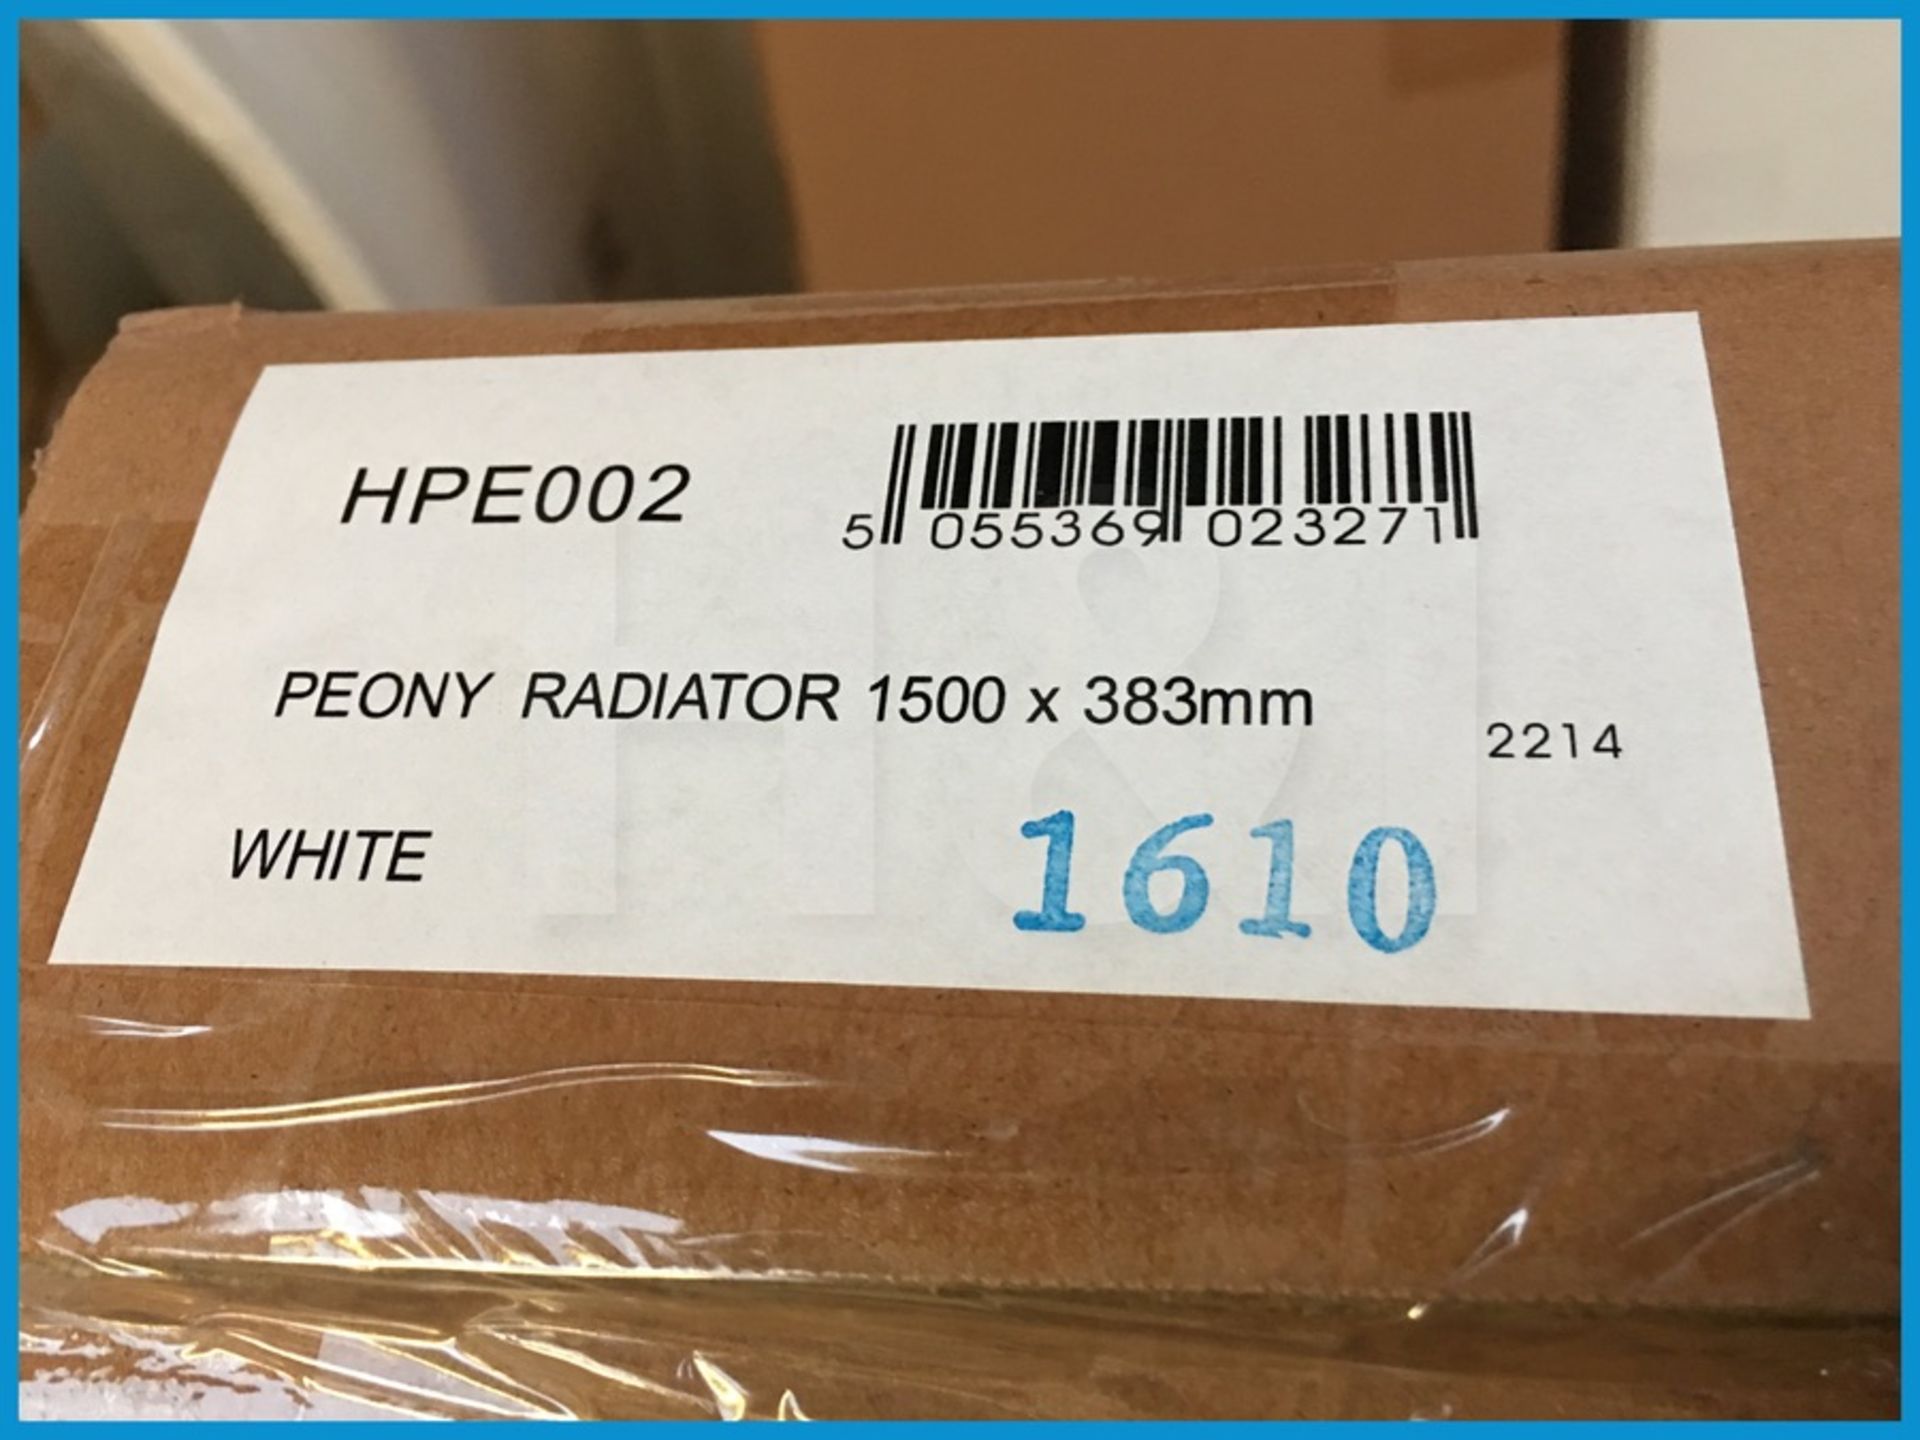 Designer Ultra HPE002 Peoni white radiator 1500x383. New and boxed. Suggested manufacturers - Image 3 of 3